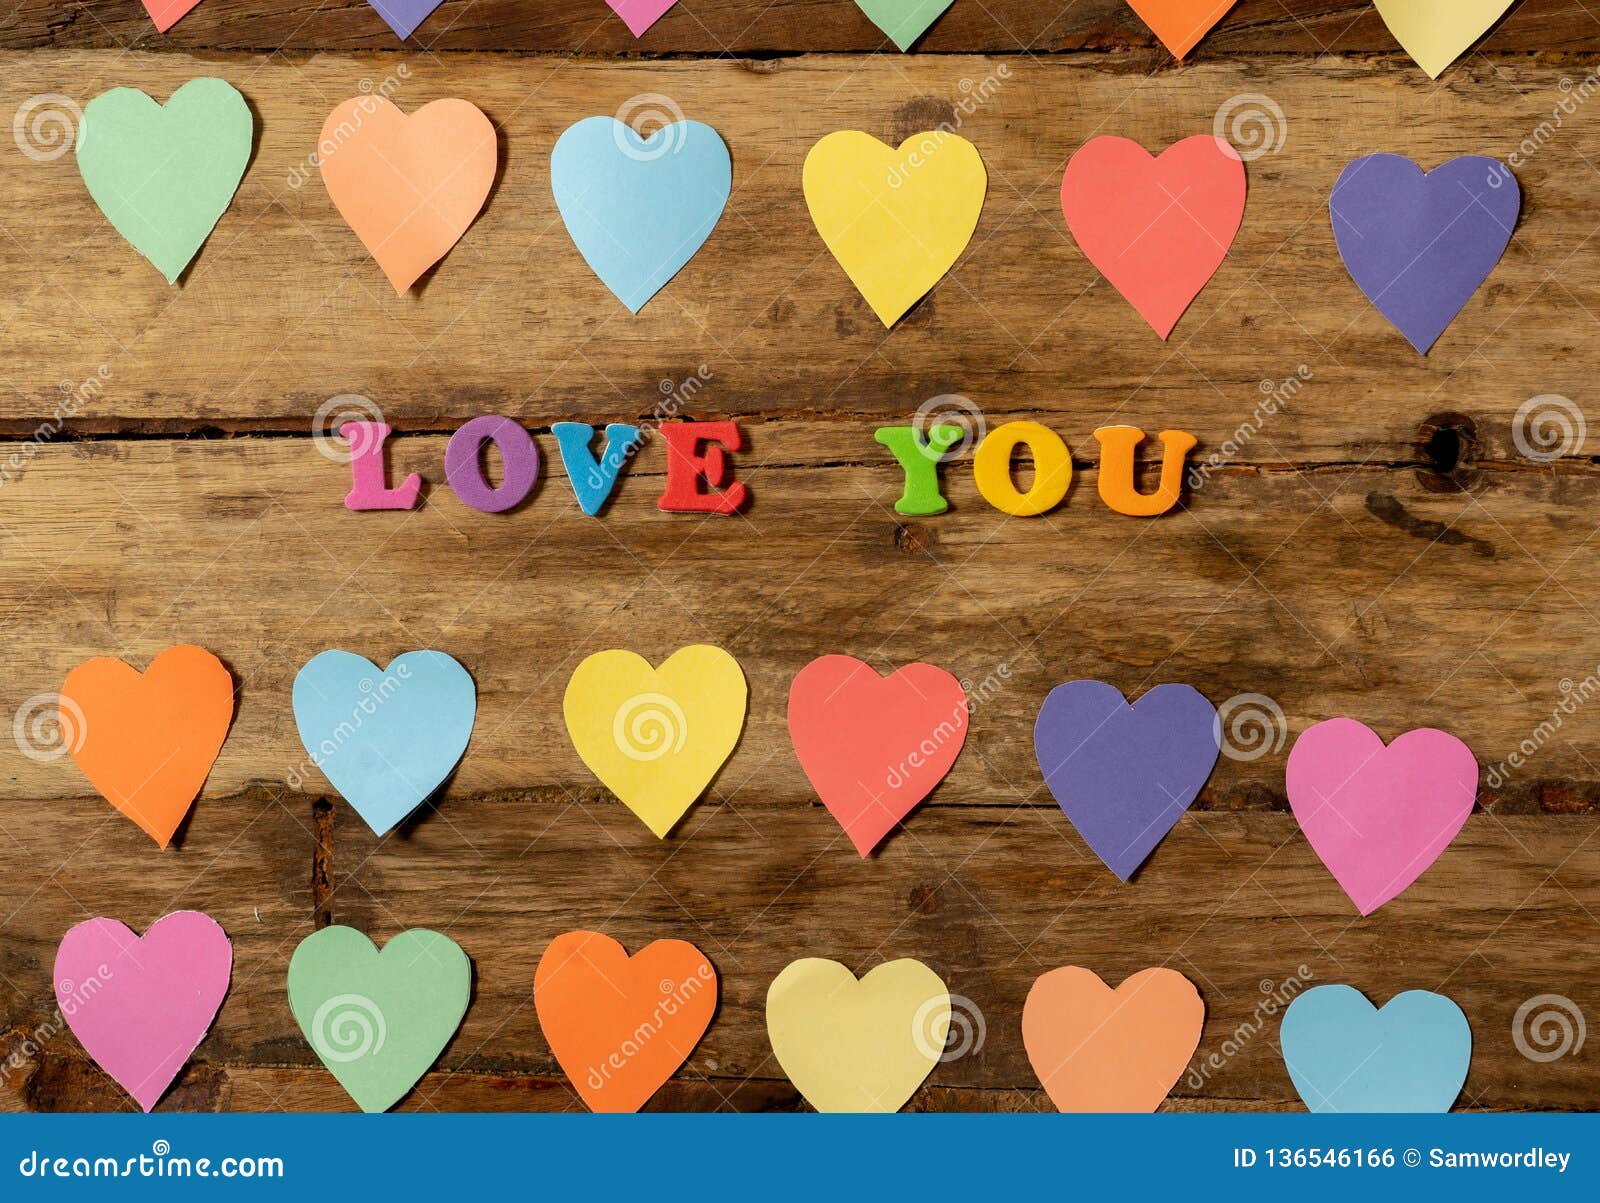 Multicolor Hearts On Wood Background And Text Love You For